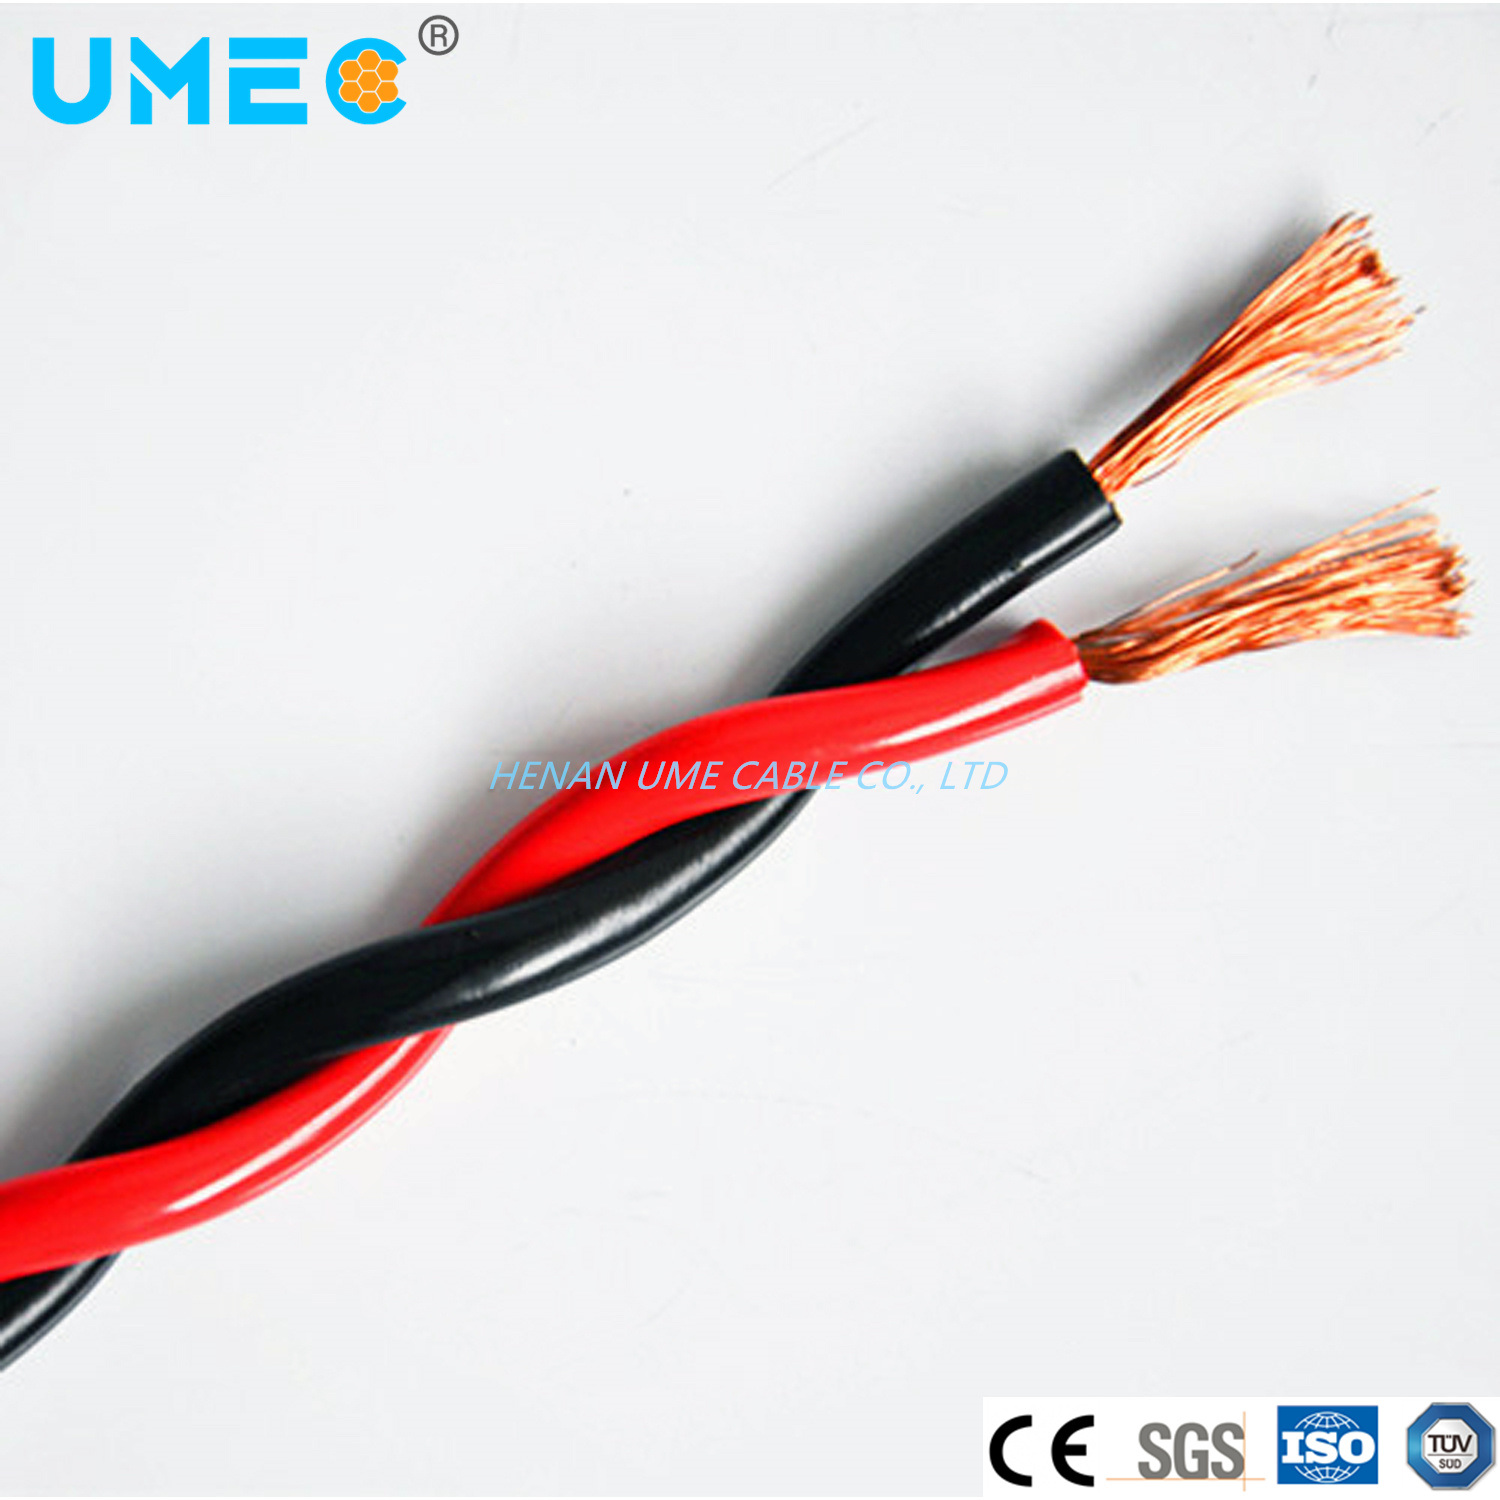 Free Sample Electric Cable Wire 2c*0.75/1.0/1.5/2.5/4.0/6.0/10mm2 Bare Copper Wire Strand with Different Color Rvs Wire and Cable